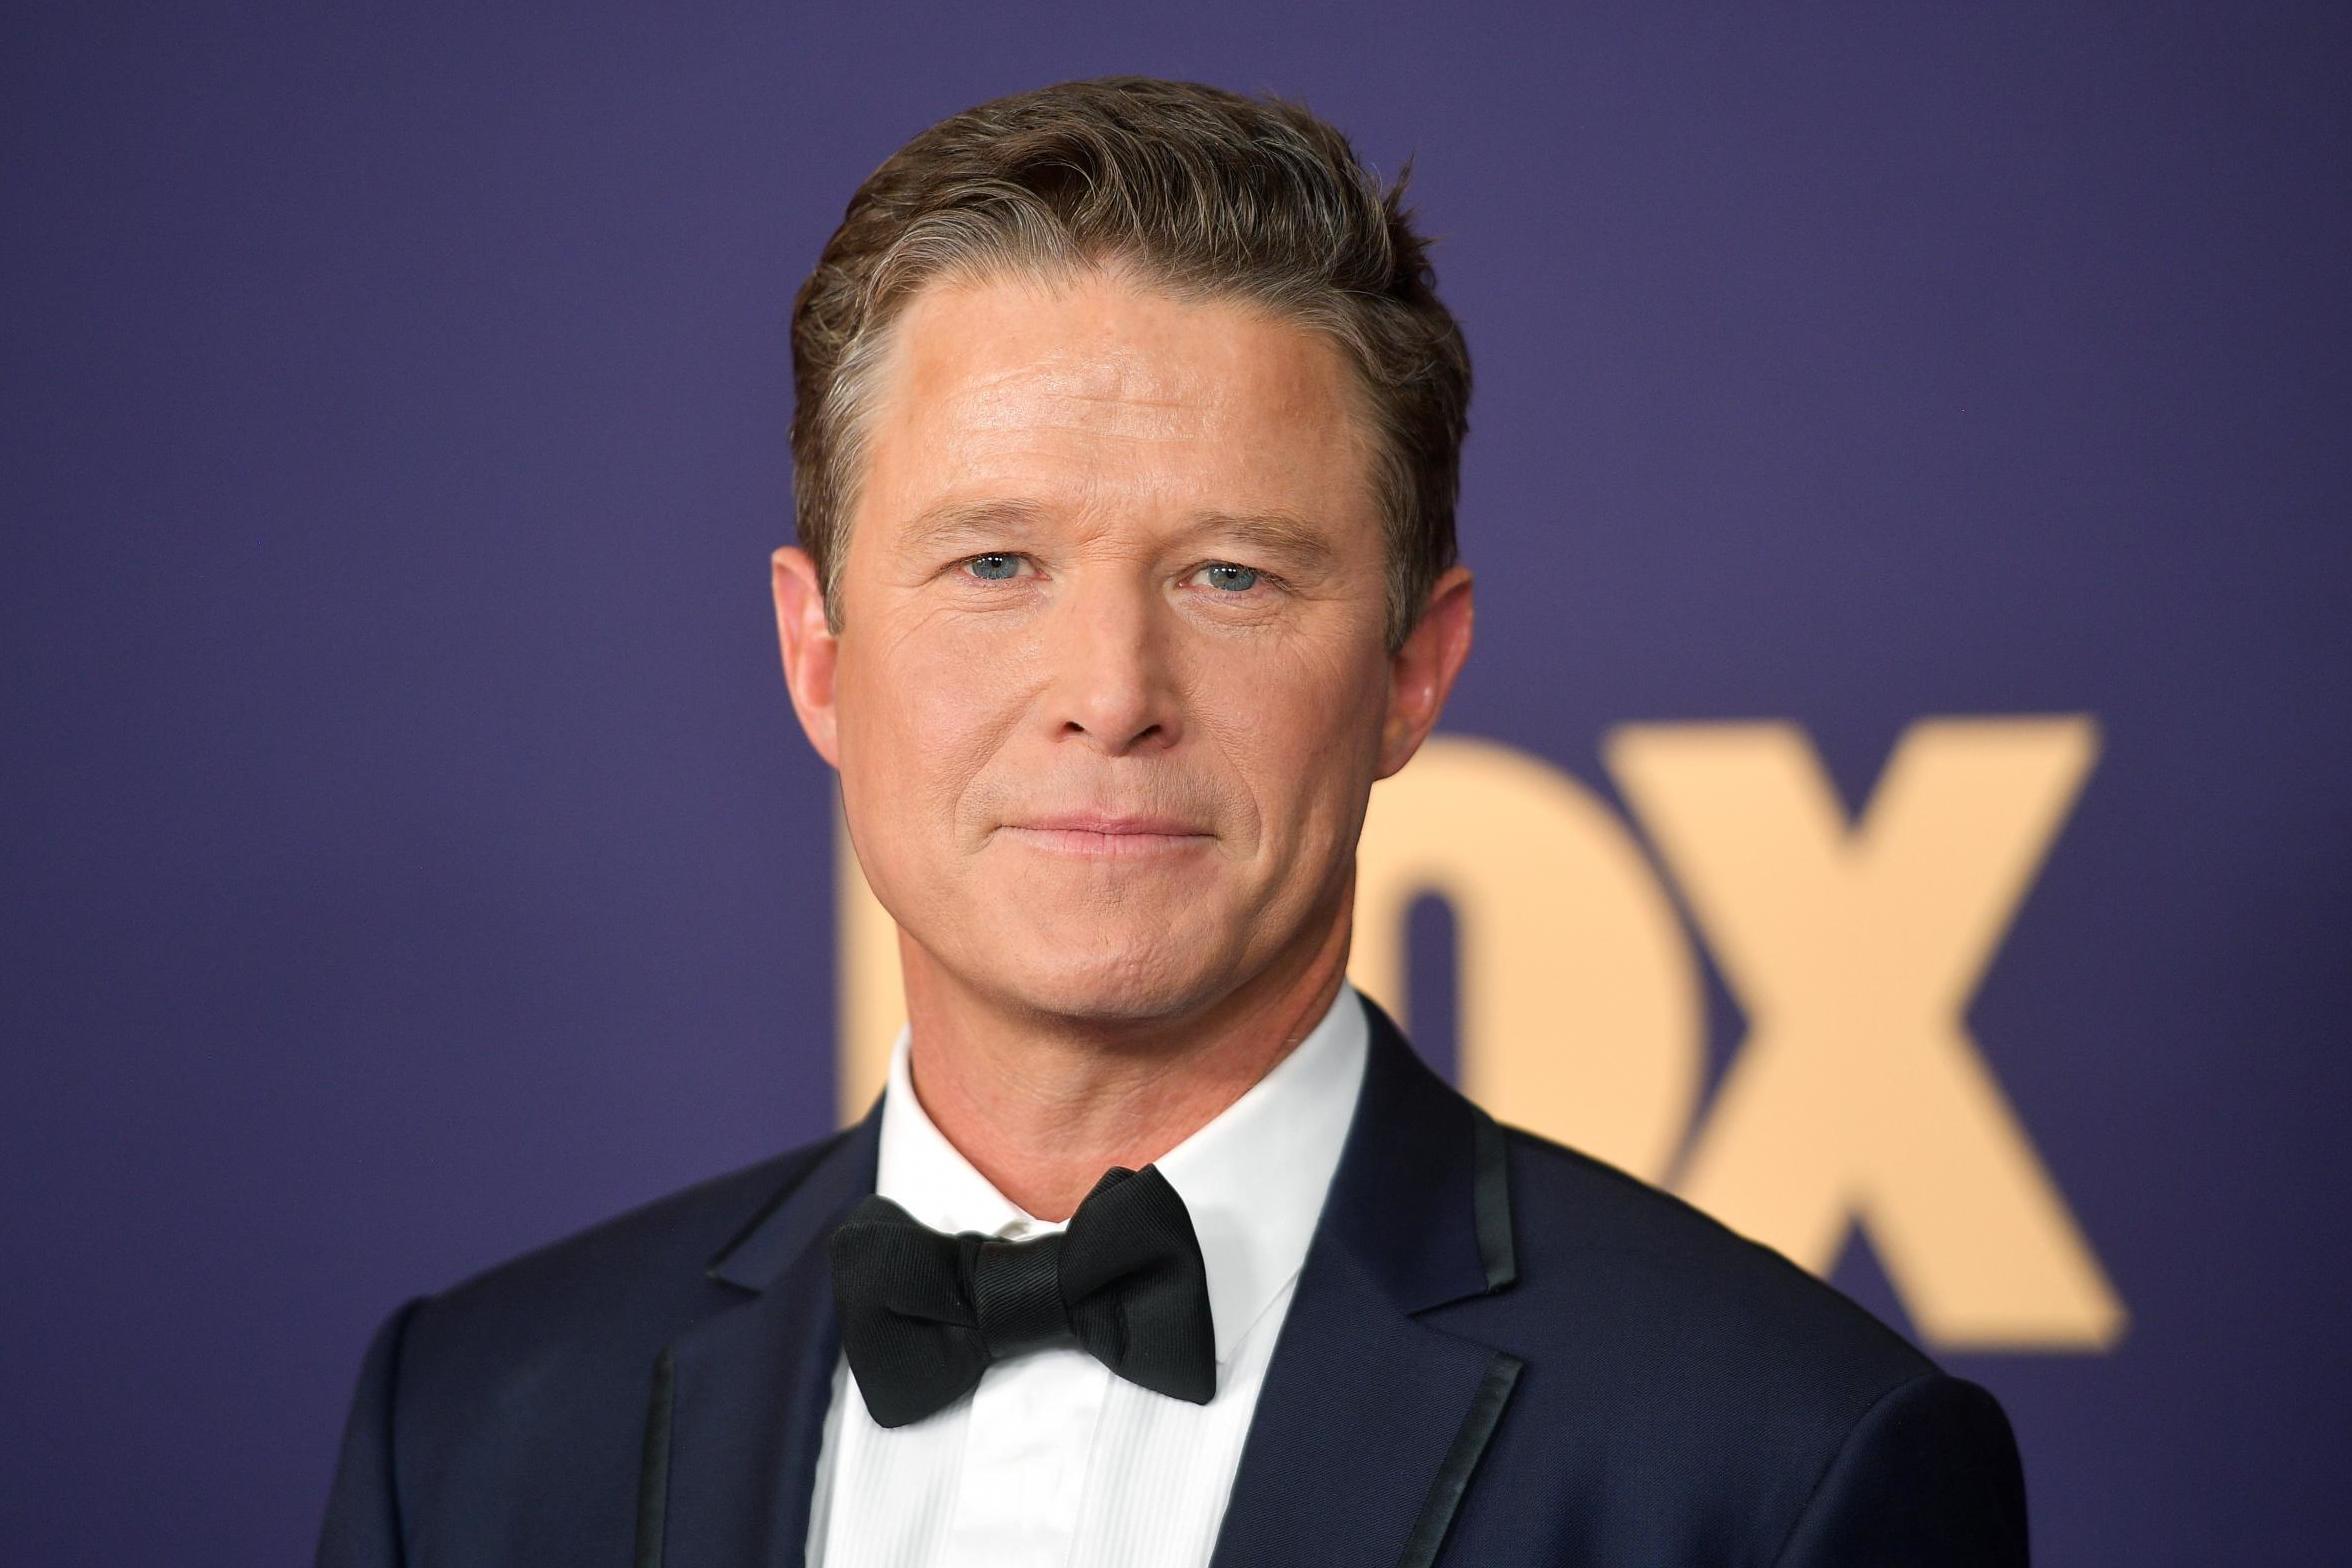 Billy Bush at the Emmy Awards on 22 September 2019 in Los Angeles, California.